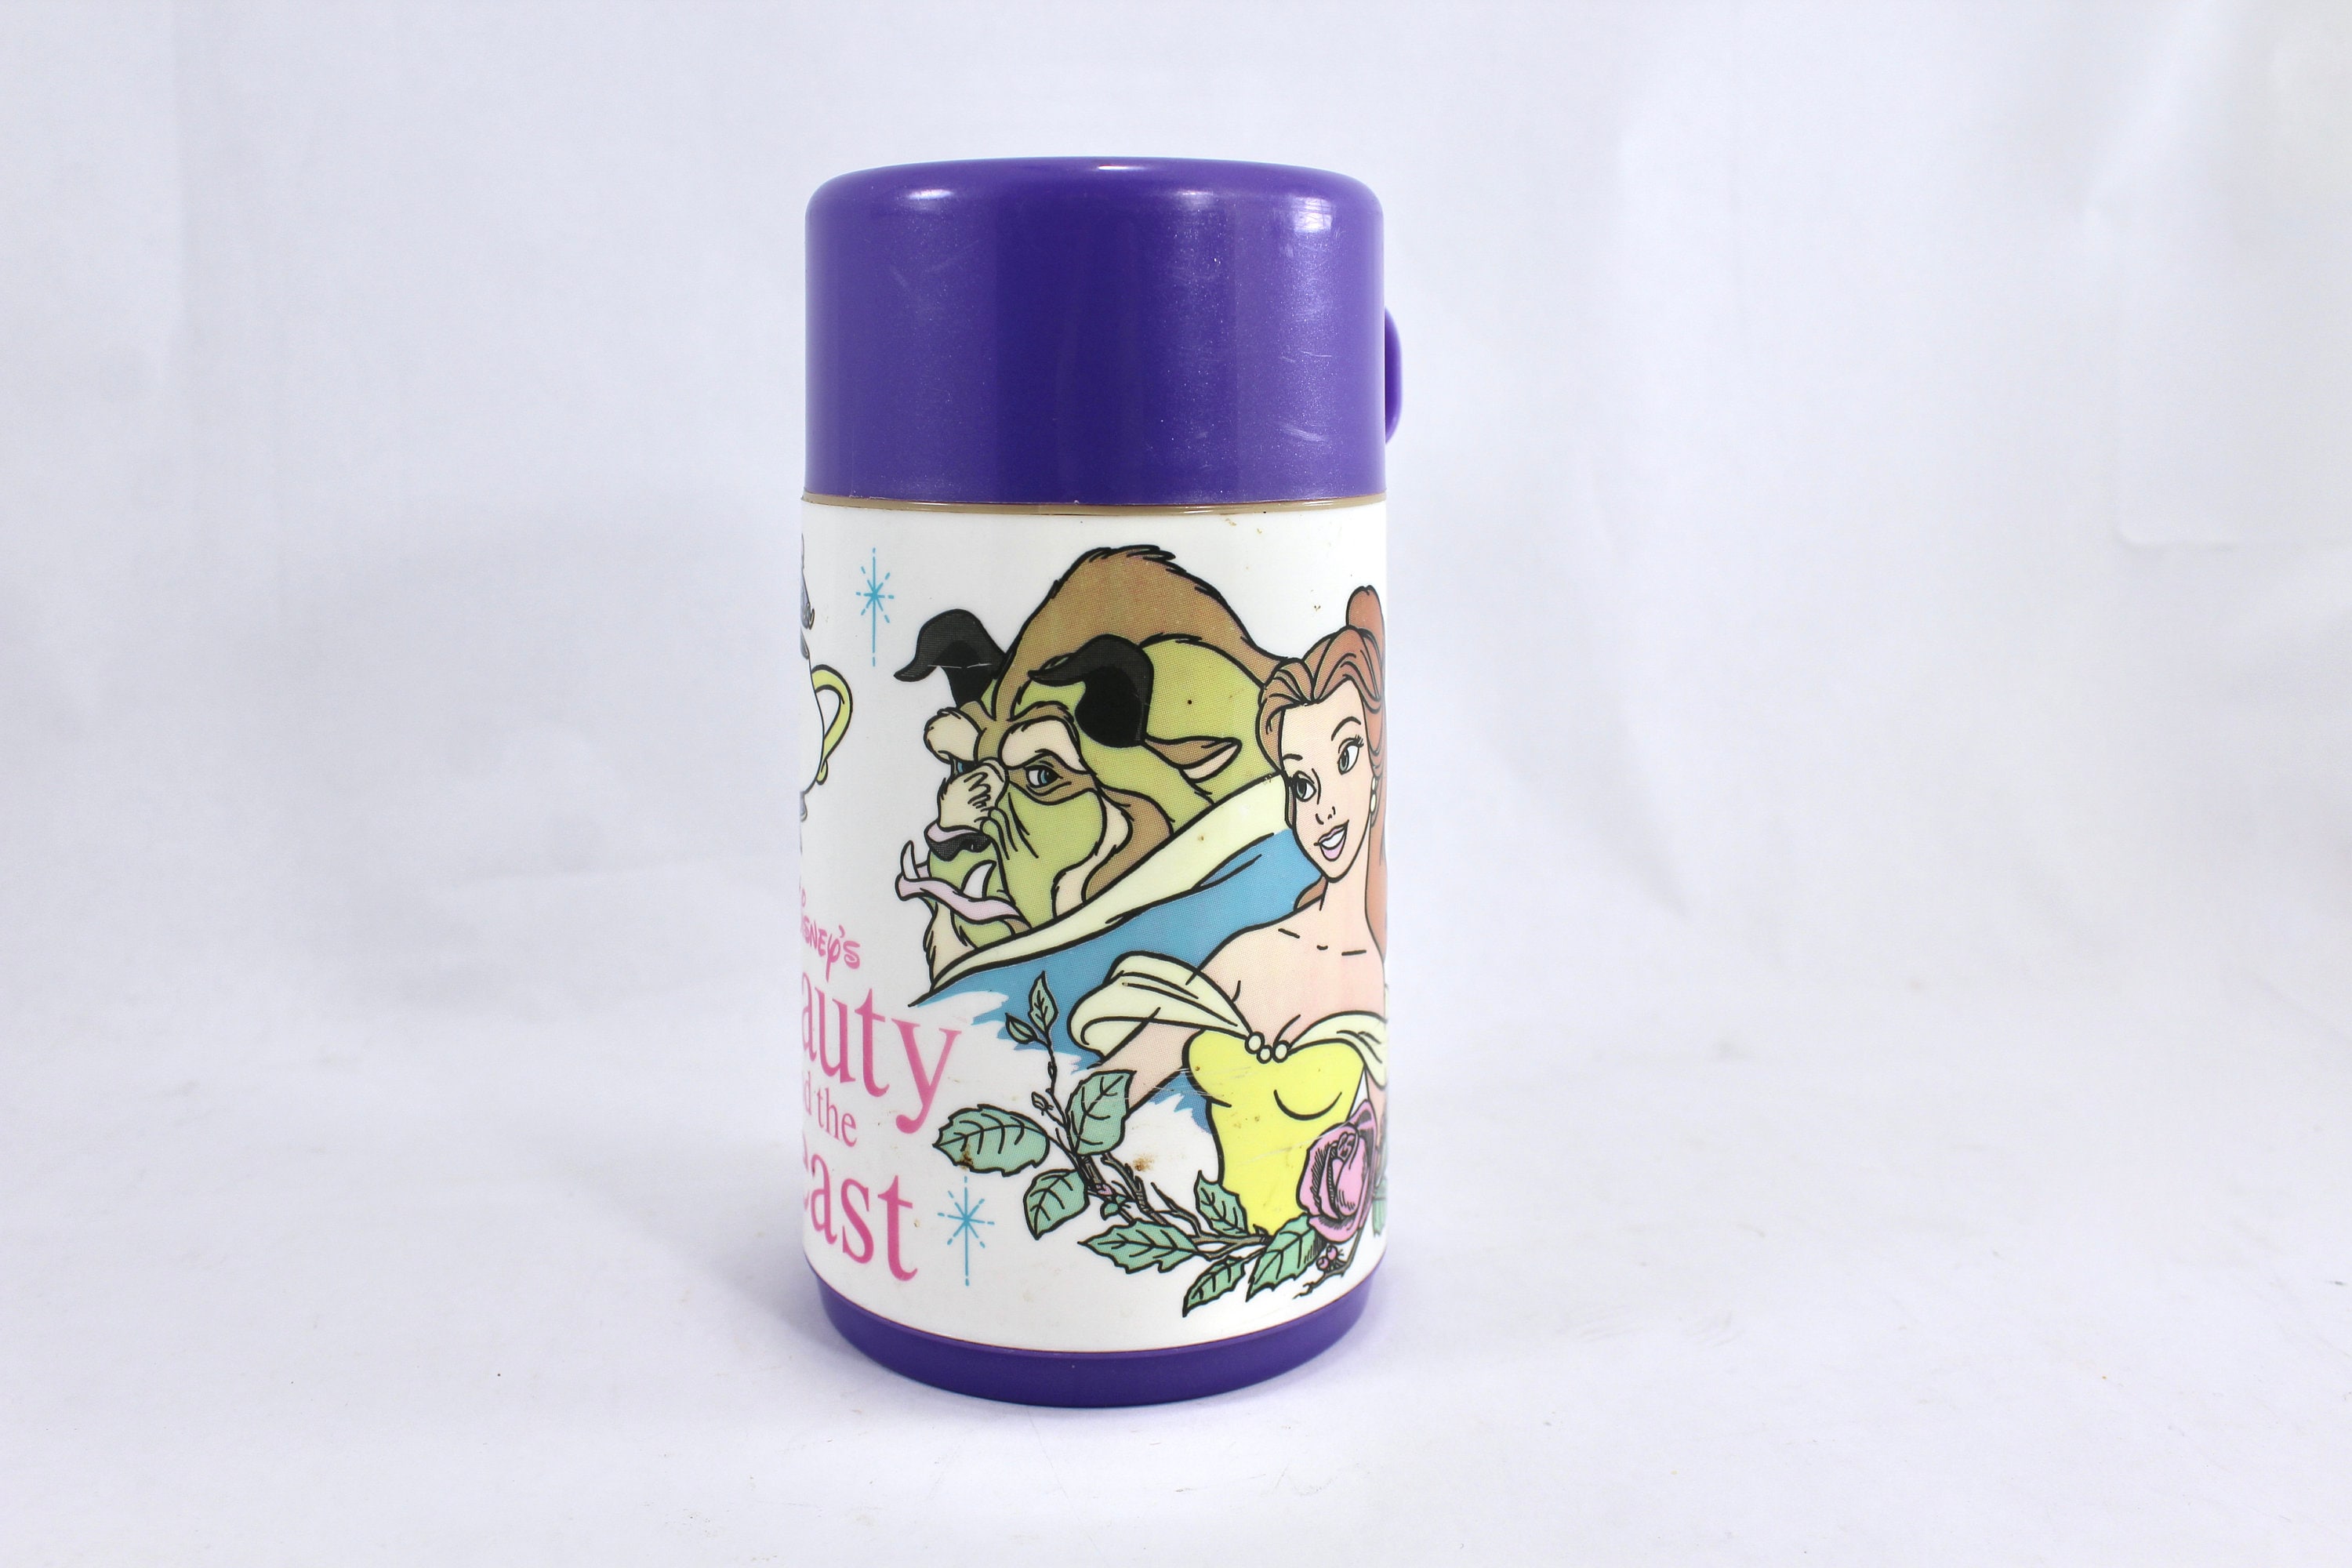 Vintage Disney's Beauty and The Beast Bell Aladdin 8 oz Thermos W